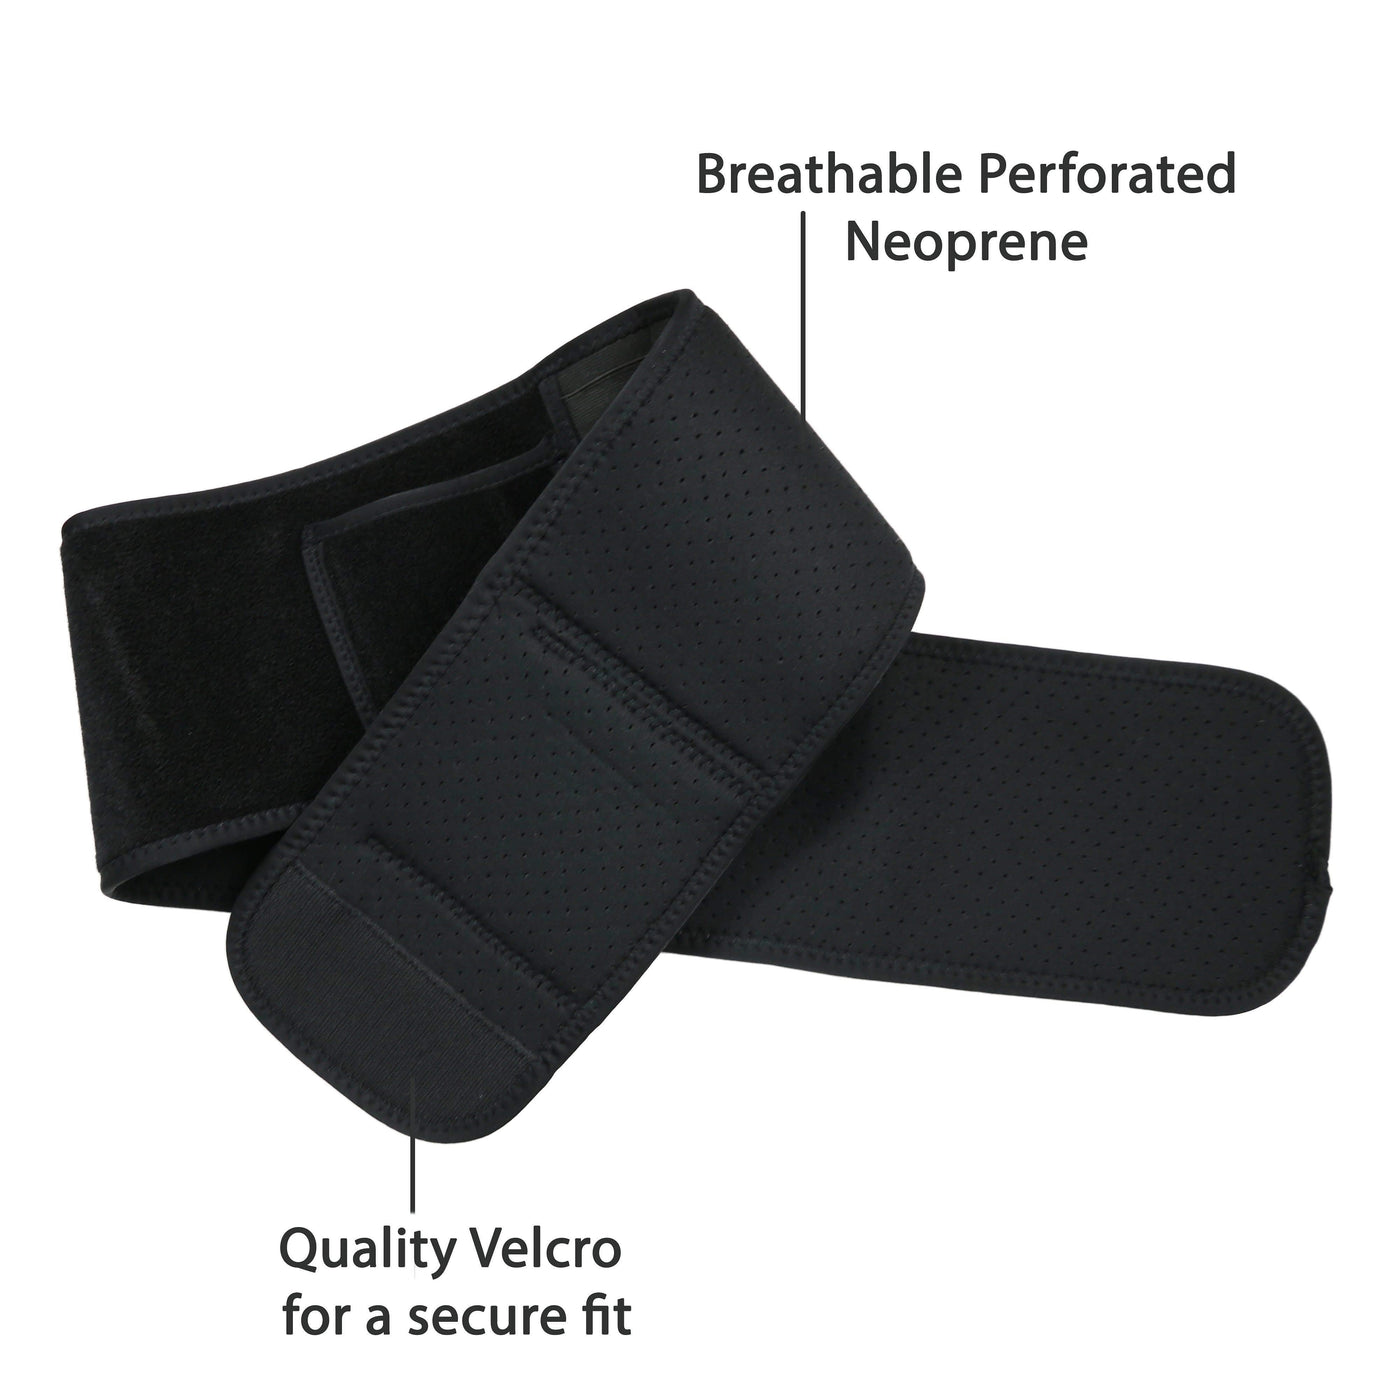 Unisex Neoprene Belly Band Holster for Concealed Carry by DS Conceal/LadyConceal